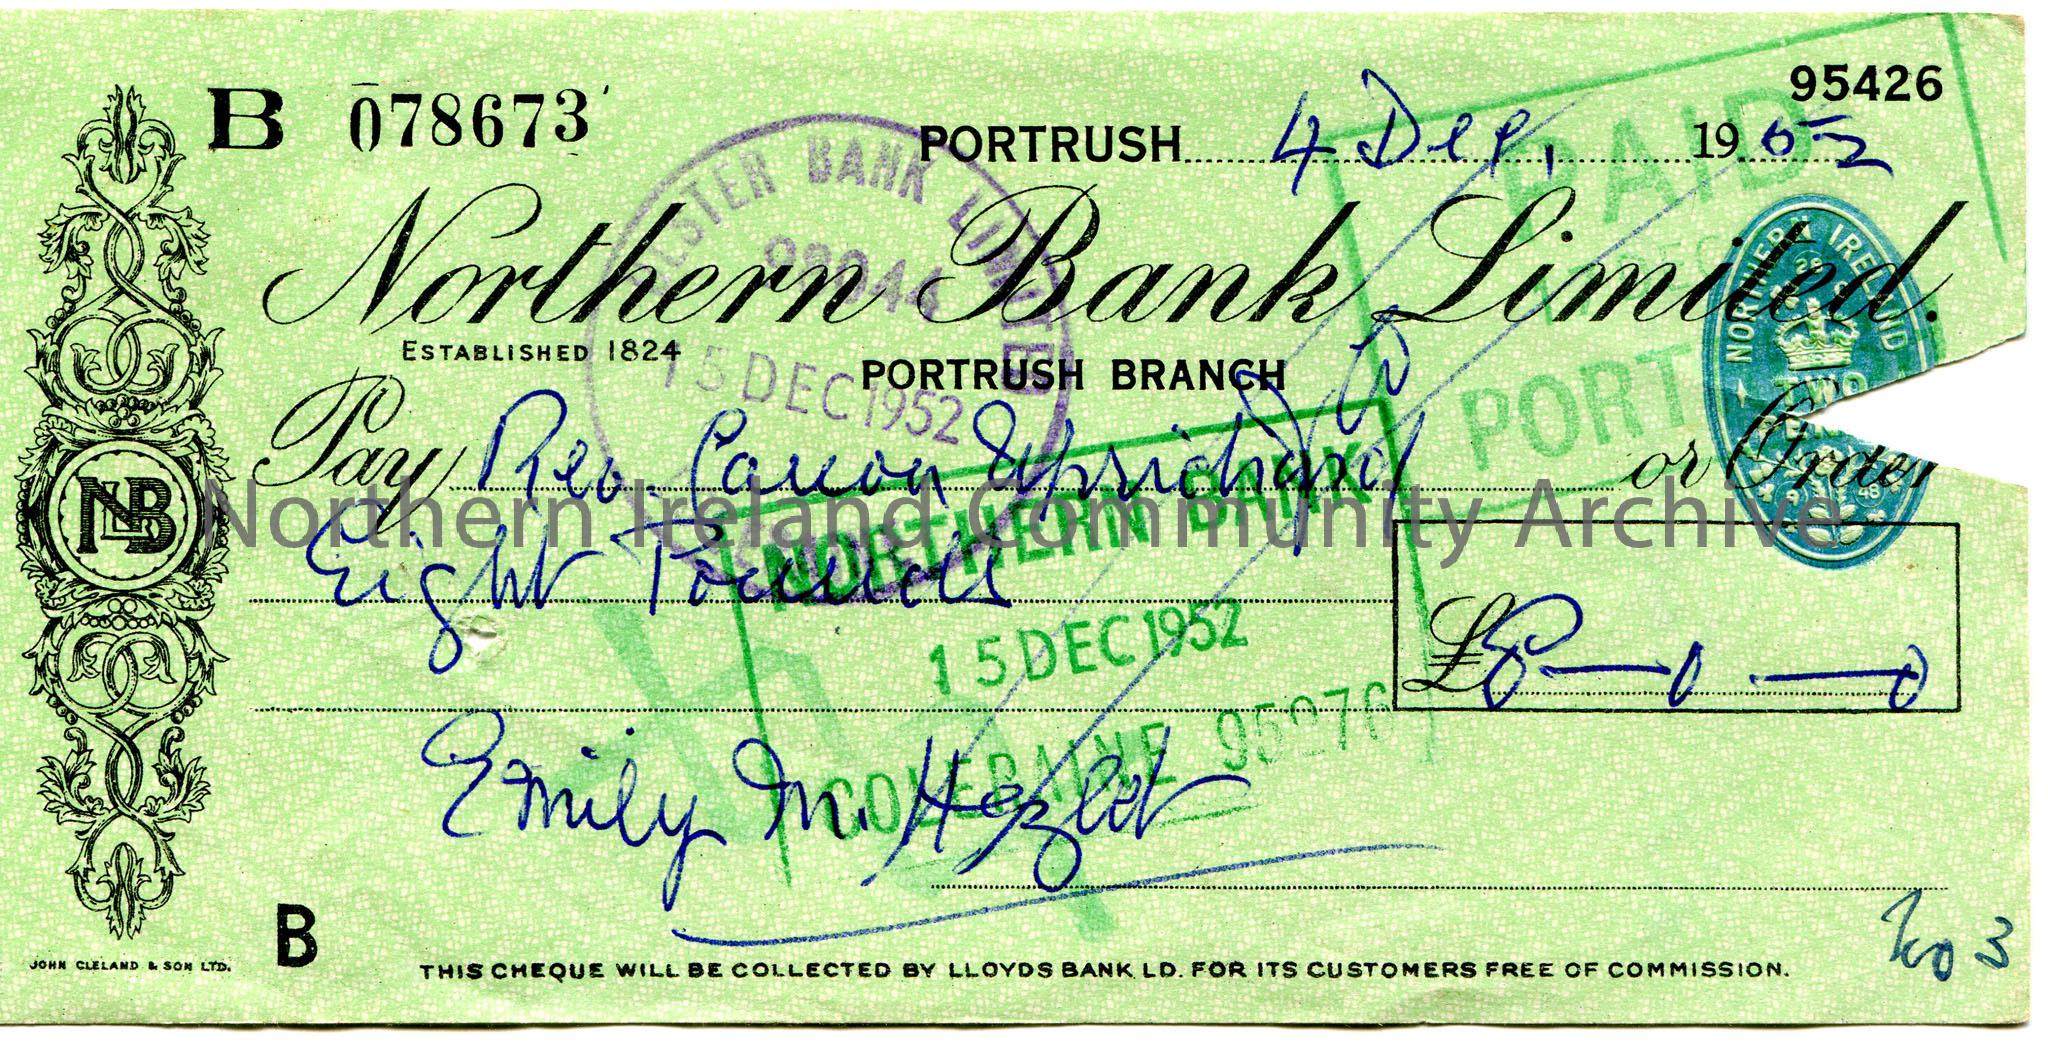 Northern Bank Limited, Portrush branch, cheque. Dated 4th December, 1952. Payable to Rev Canon Uprichard from Emily M. Hezlet for £8.0.0. Scored …